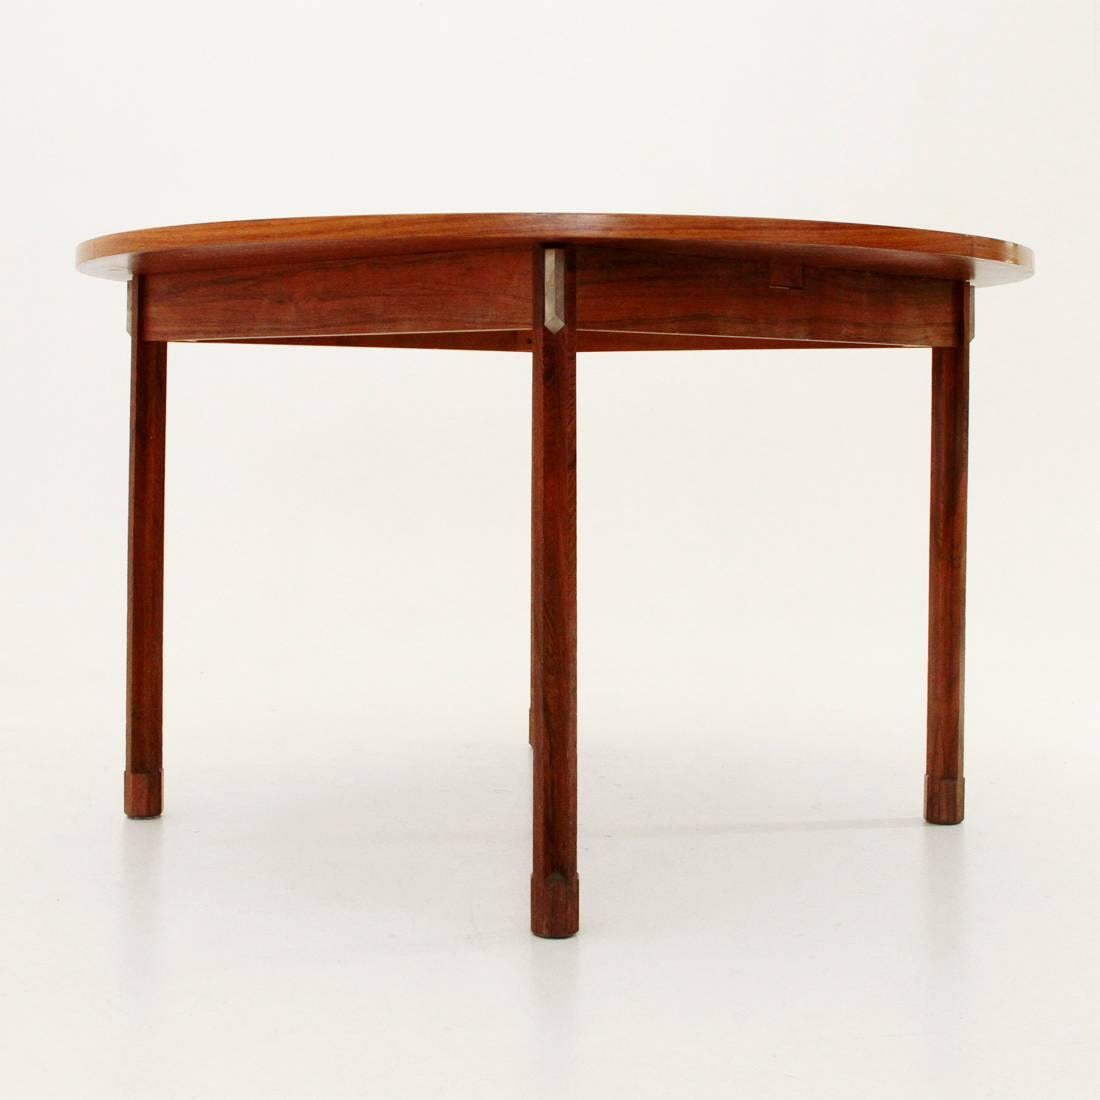 Mid-Century Modern Round wood and aluminum Table By Georges Coslin for 3V arredamenti, 1960's